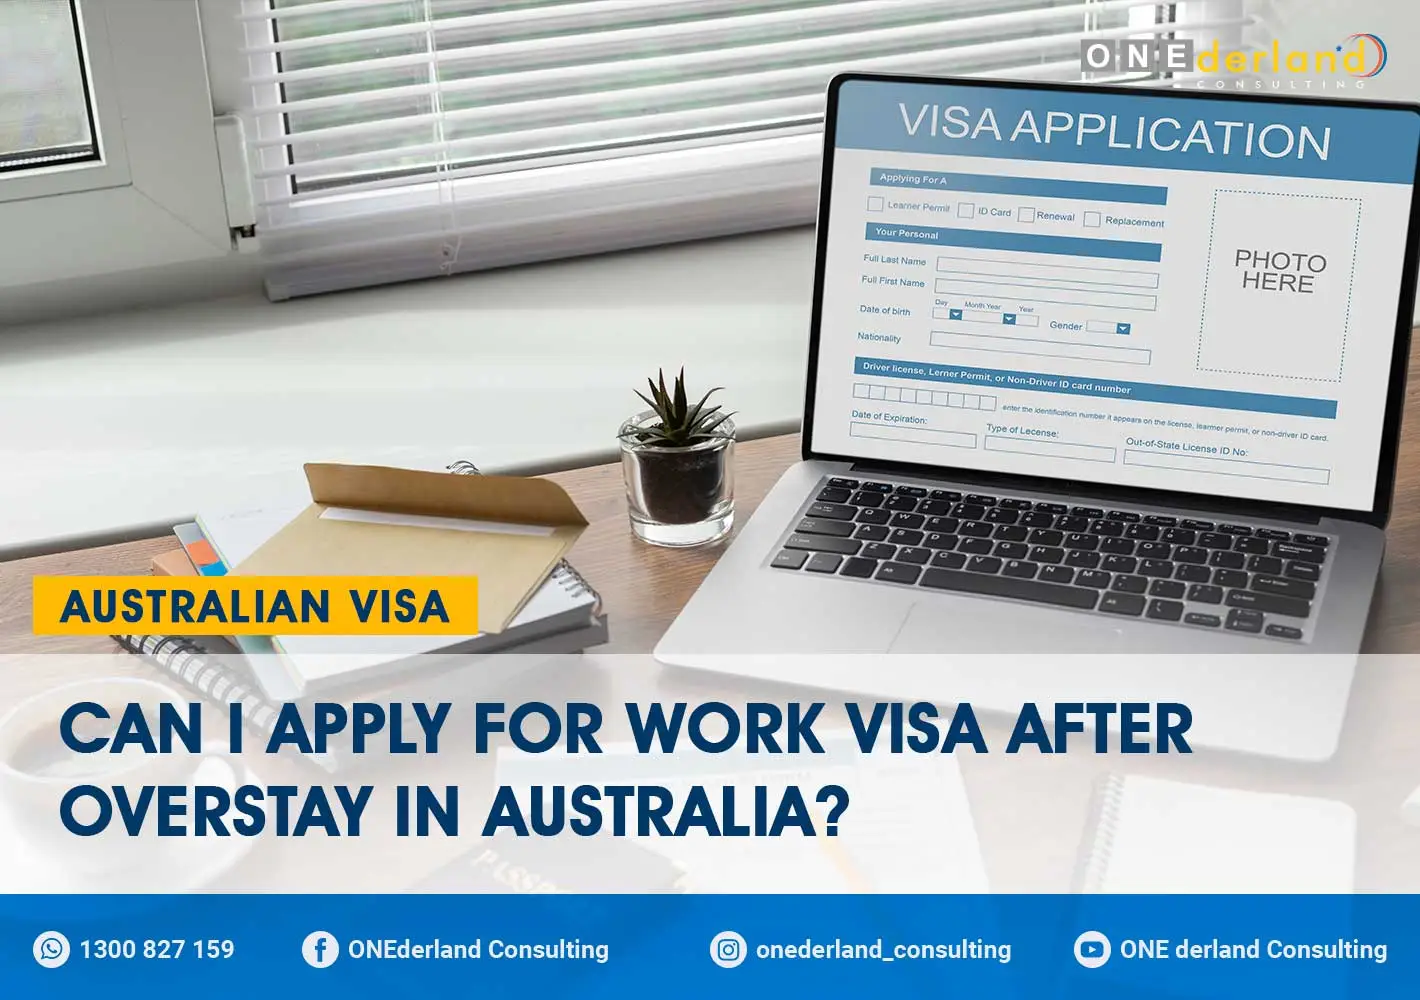 Can I Apply for Work Visa After Overstay in Australia?